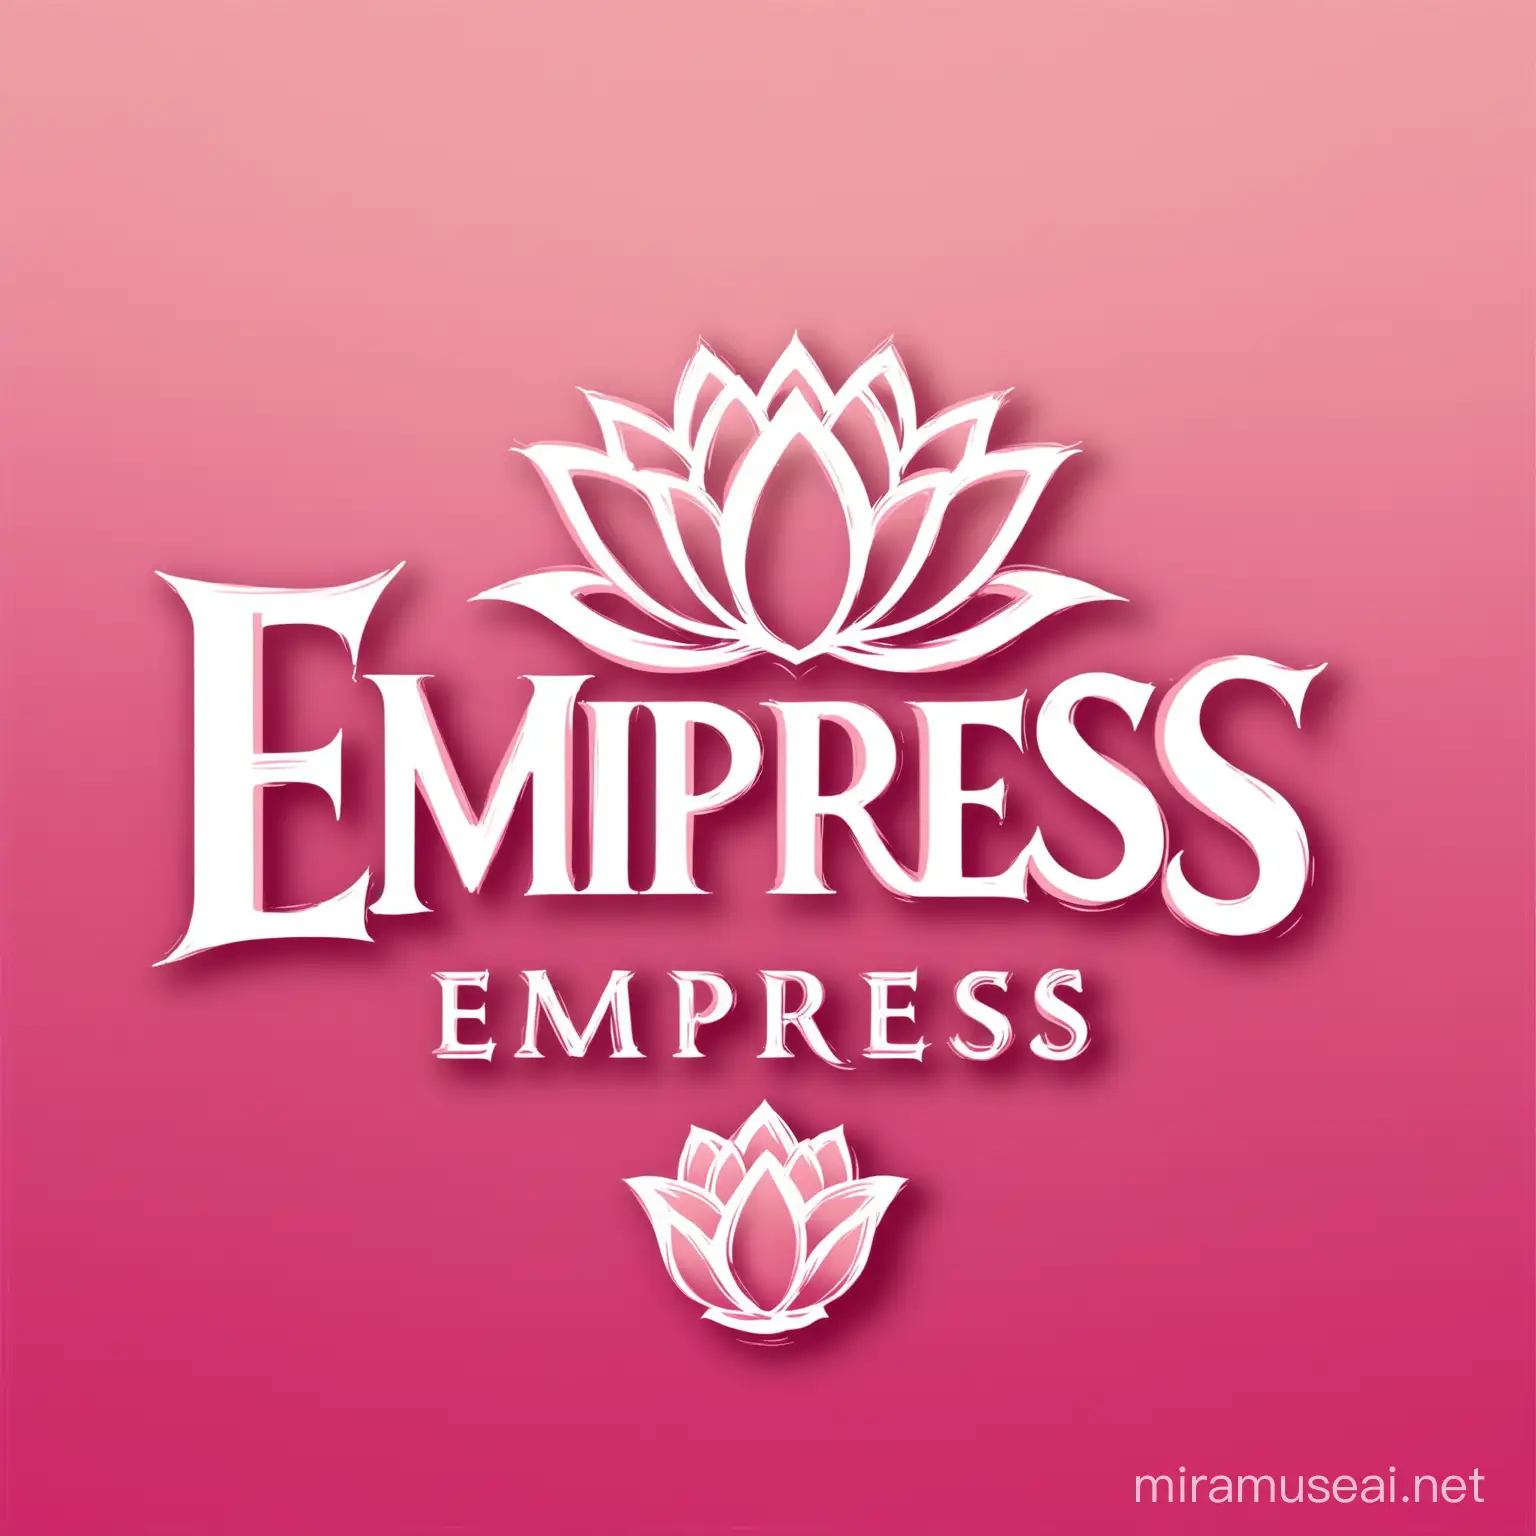 Create a logo for my Brand, the brand is called Empress V. Use pinks for the color palette. Have a picture of a lotus flower in the background for the logo. Have "Empress V" in bold letters in the front, with a styled font that is attractive and feminine.